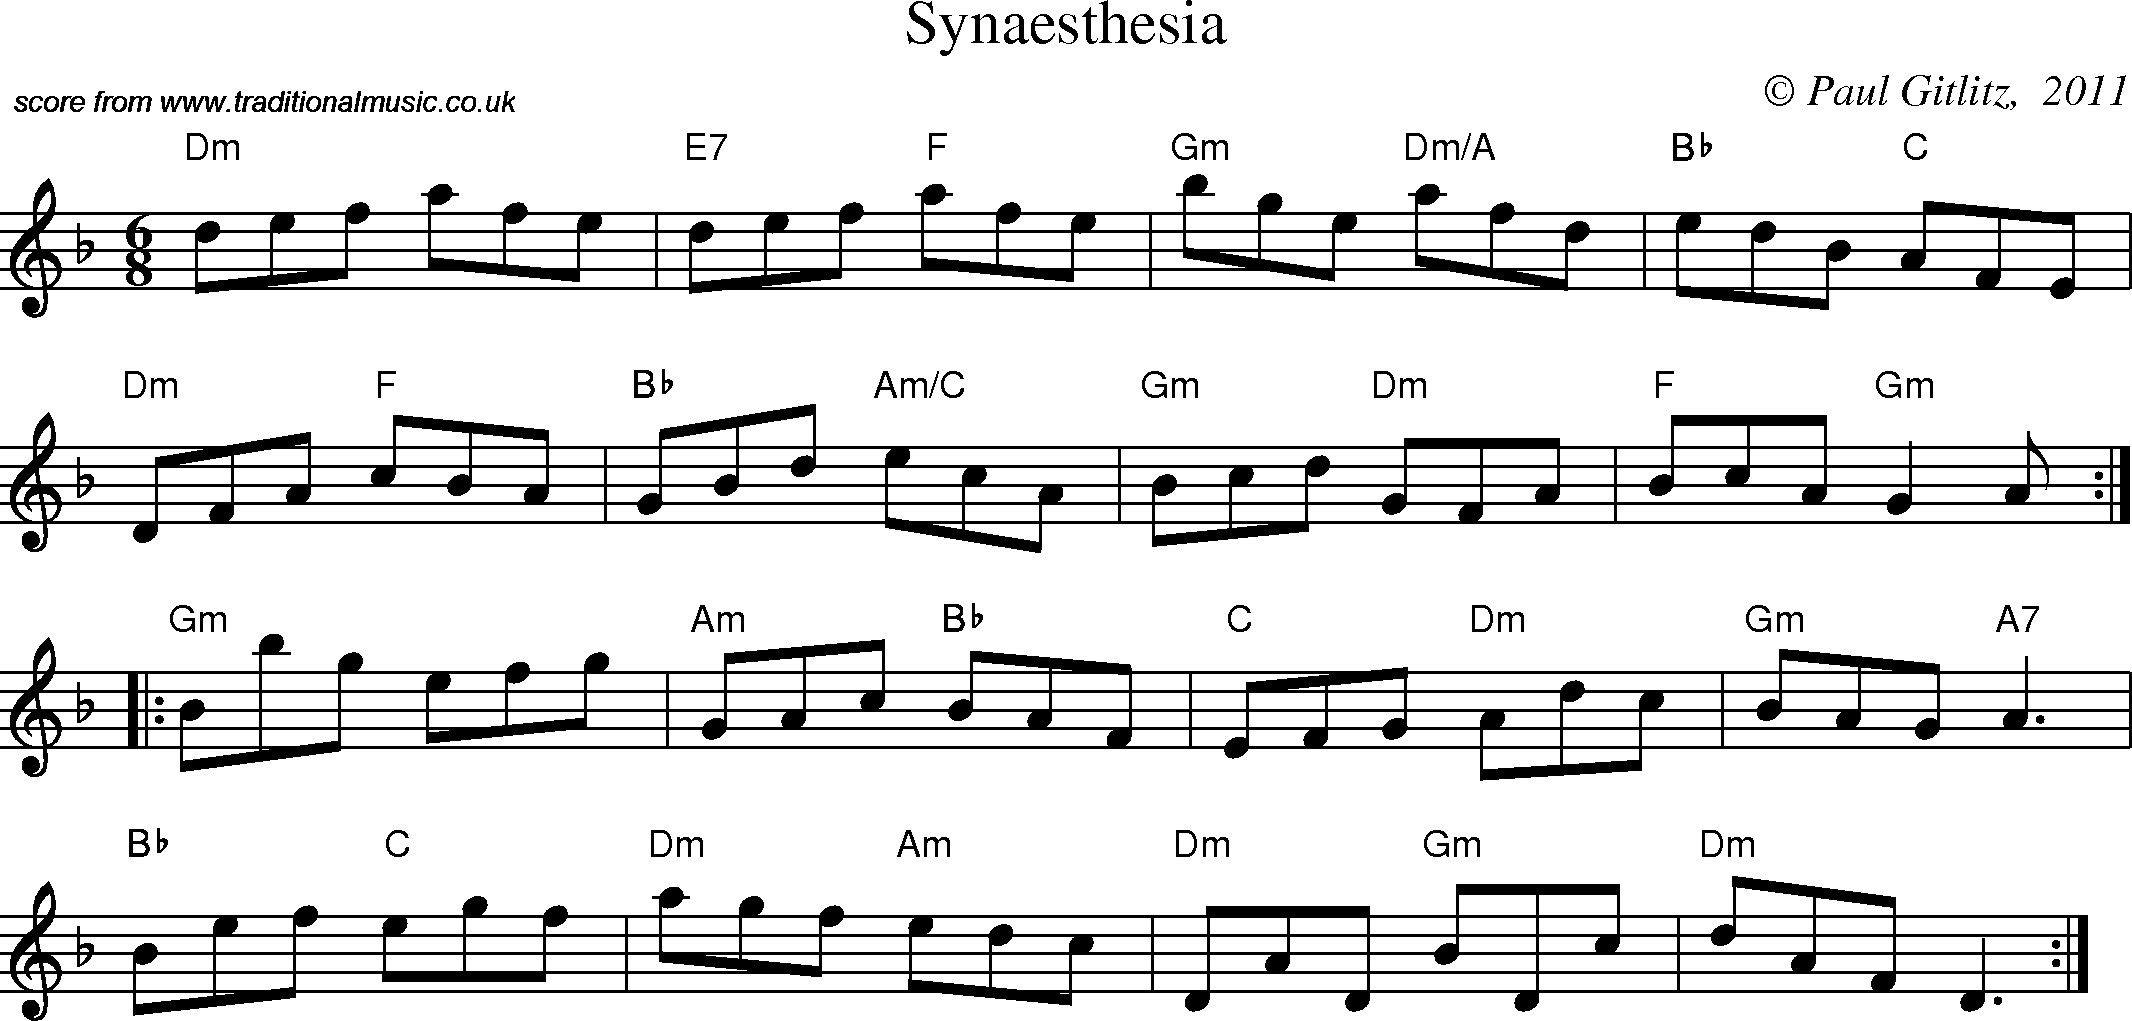 Sheet Music Score for Jig - Synaesthesia